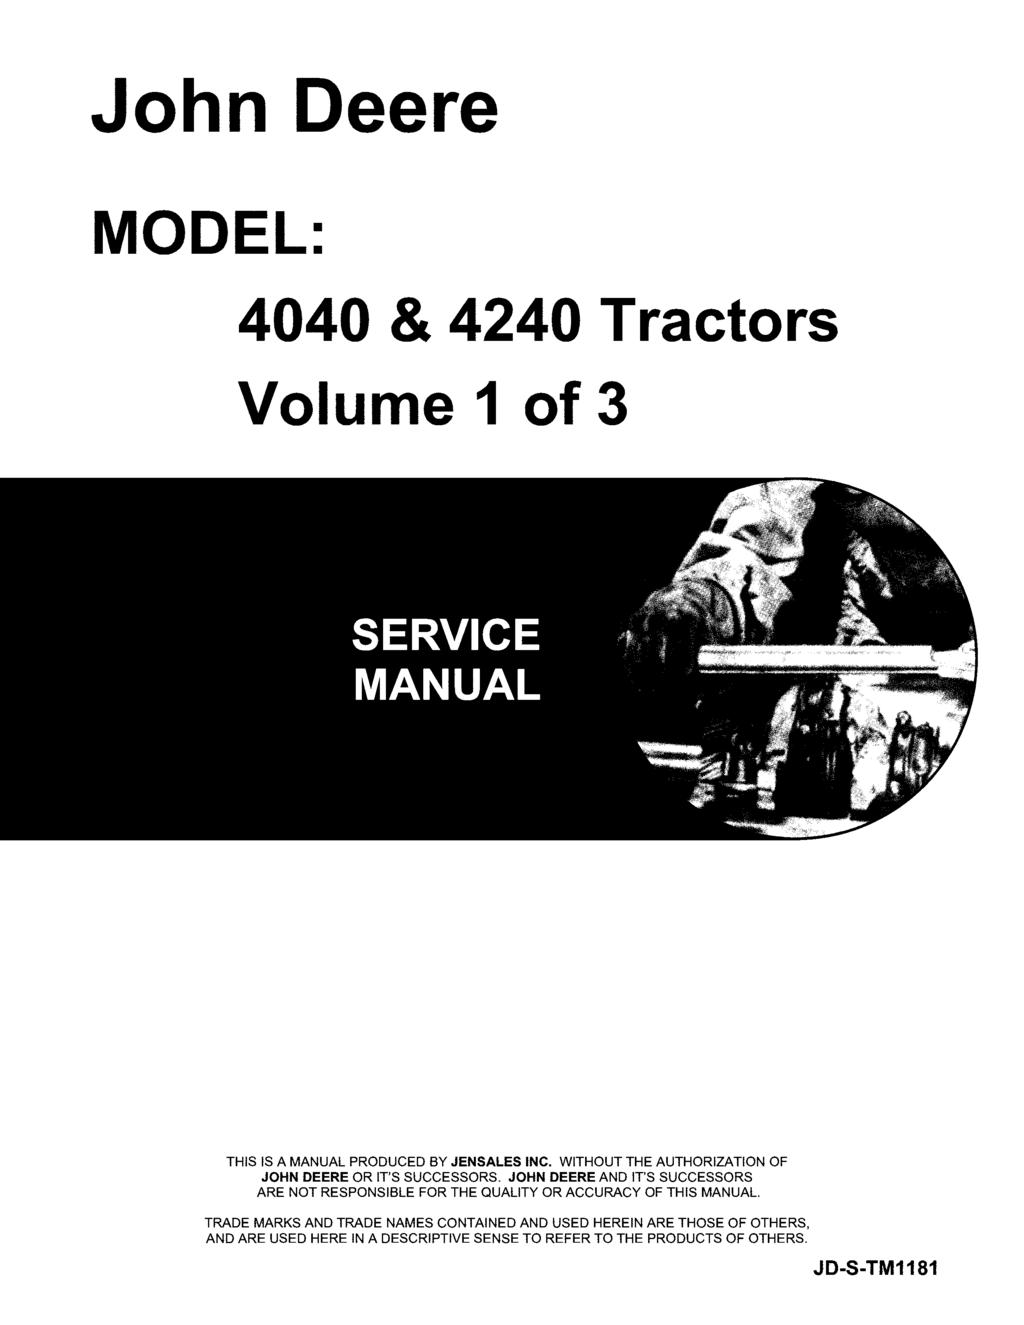 John Deere MODEL: 4040 & 4240 Tractors Volume 1 of 3 THIS IS A MANUAL PRODUCED BY JENSALES INC. WITHOUT THE AUTHORIZATION OF JOHN DEERE OR IT'S SUCCESSORS.